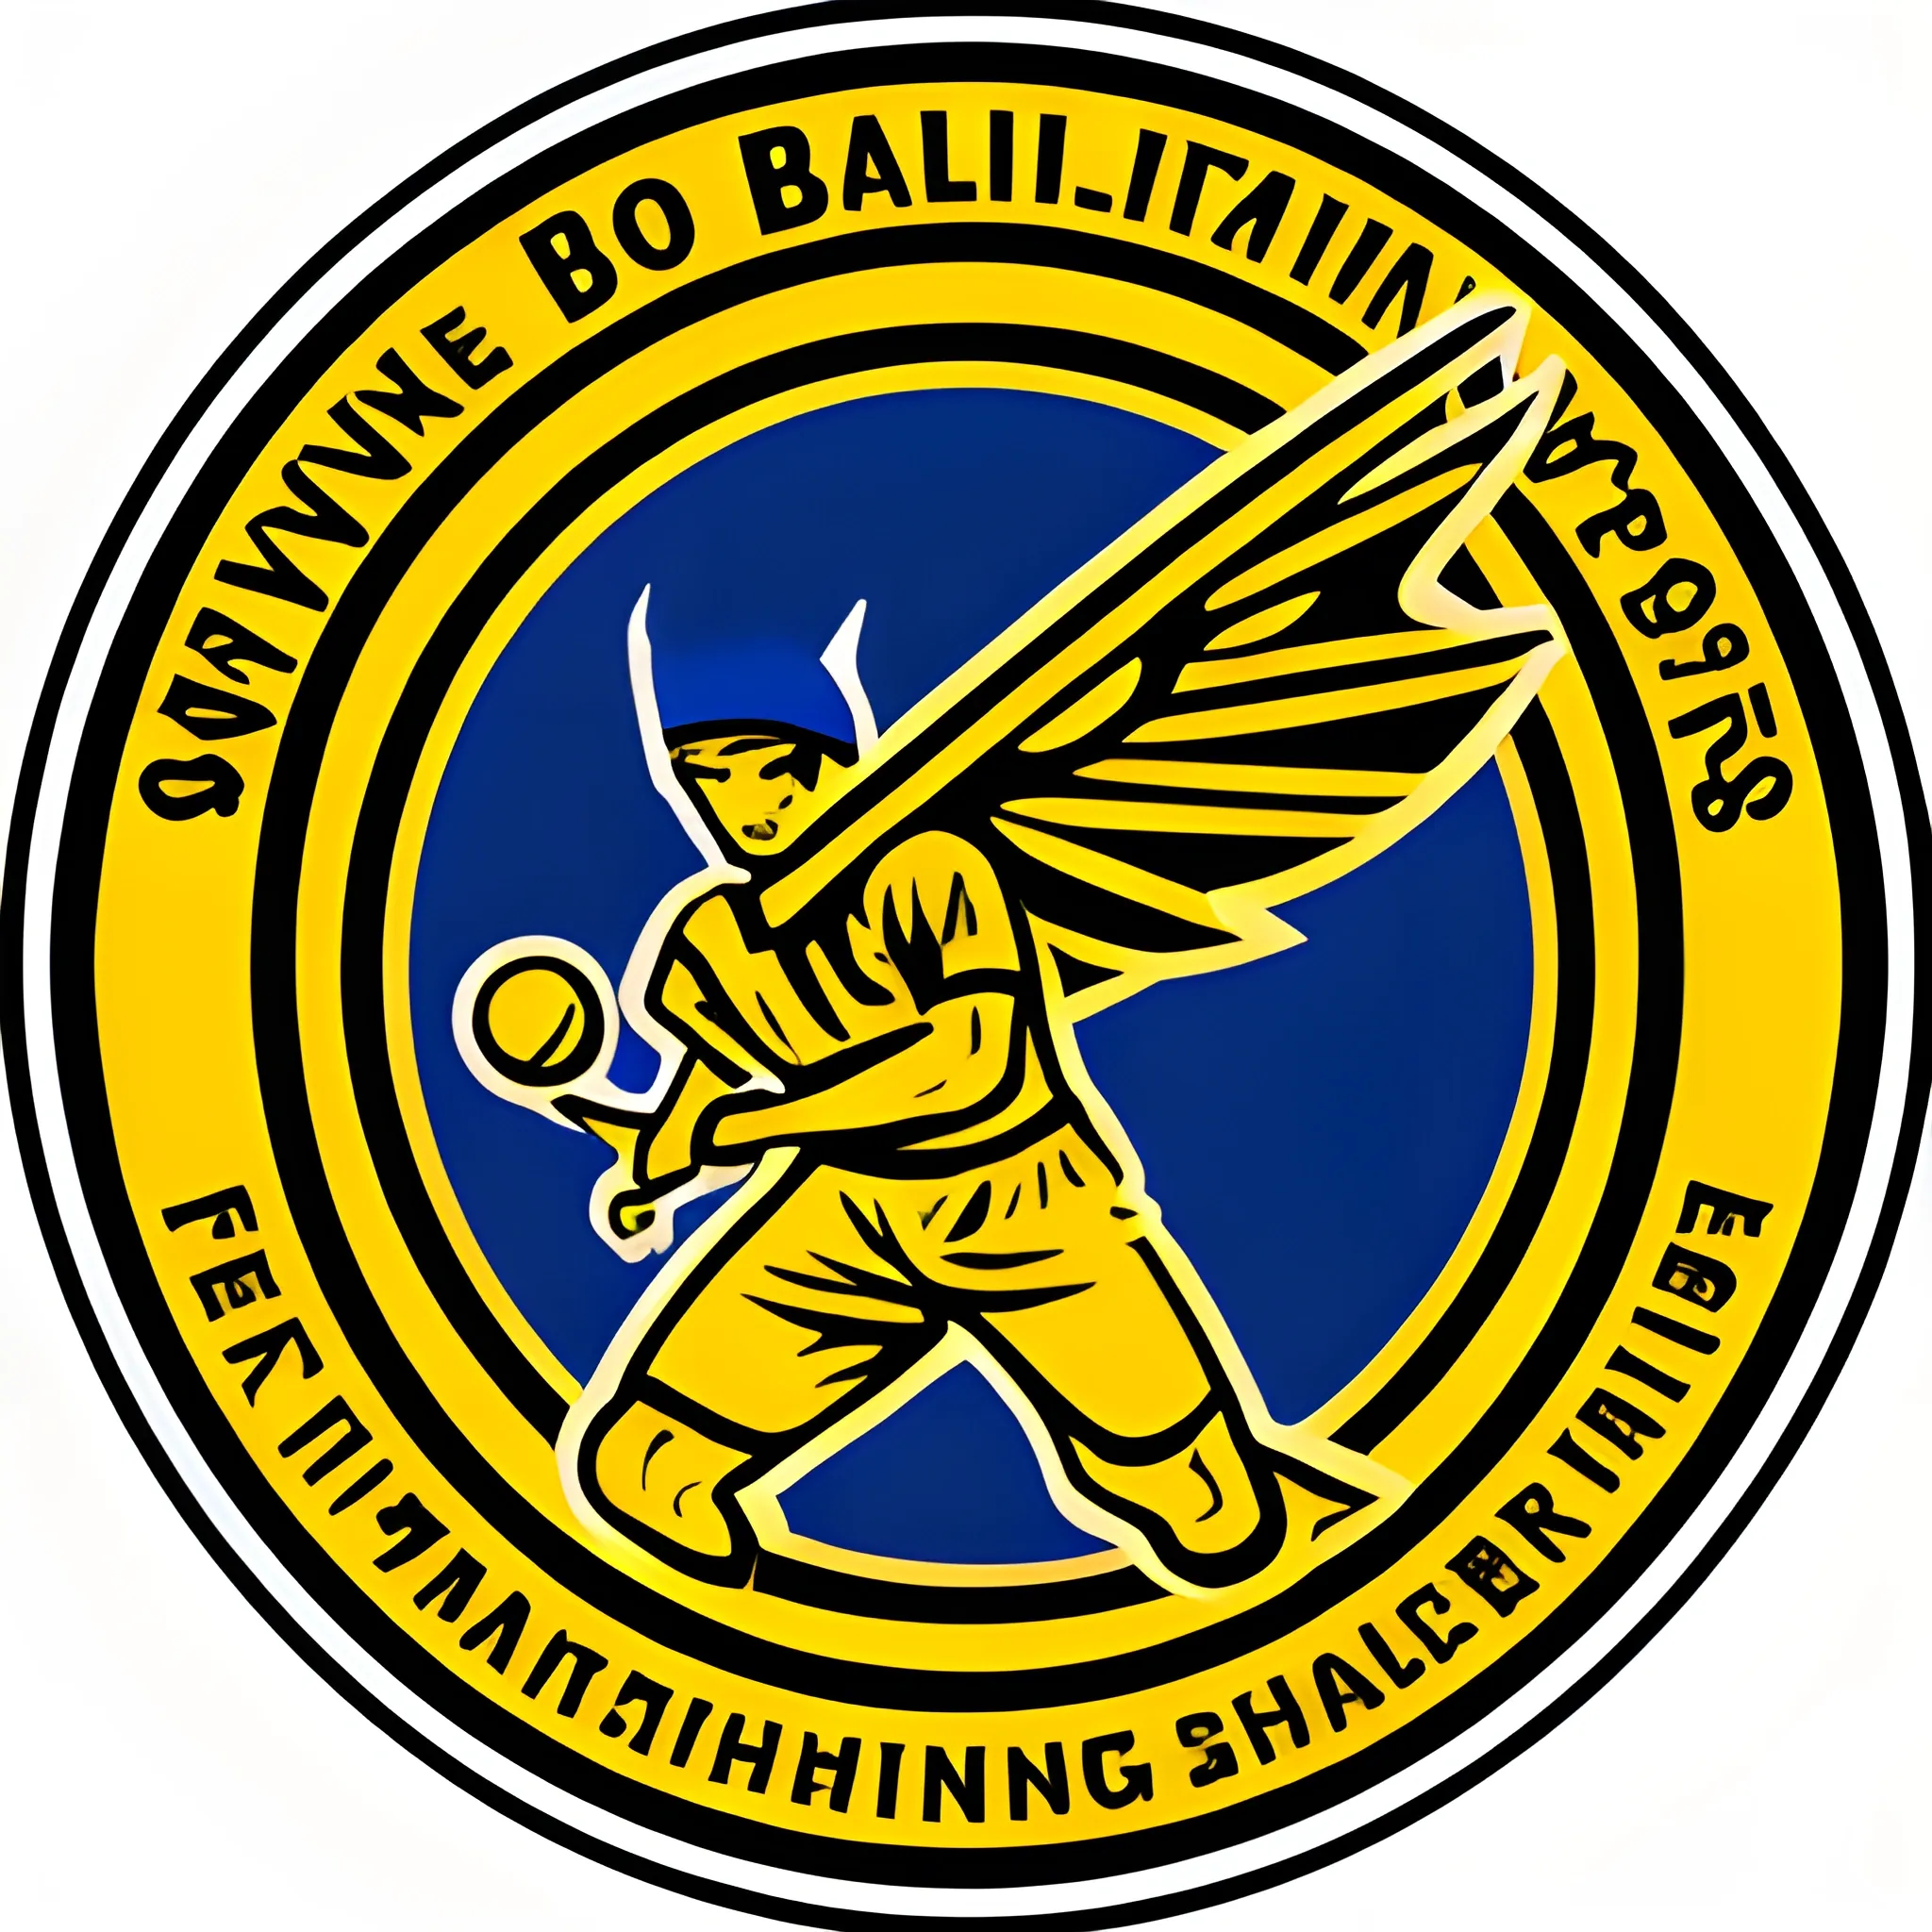 Make a vector png emblem for my chothing shop. The name of my shop is "Baliwagan", the theme is sports.
